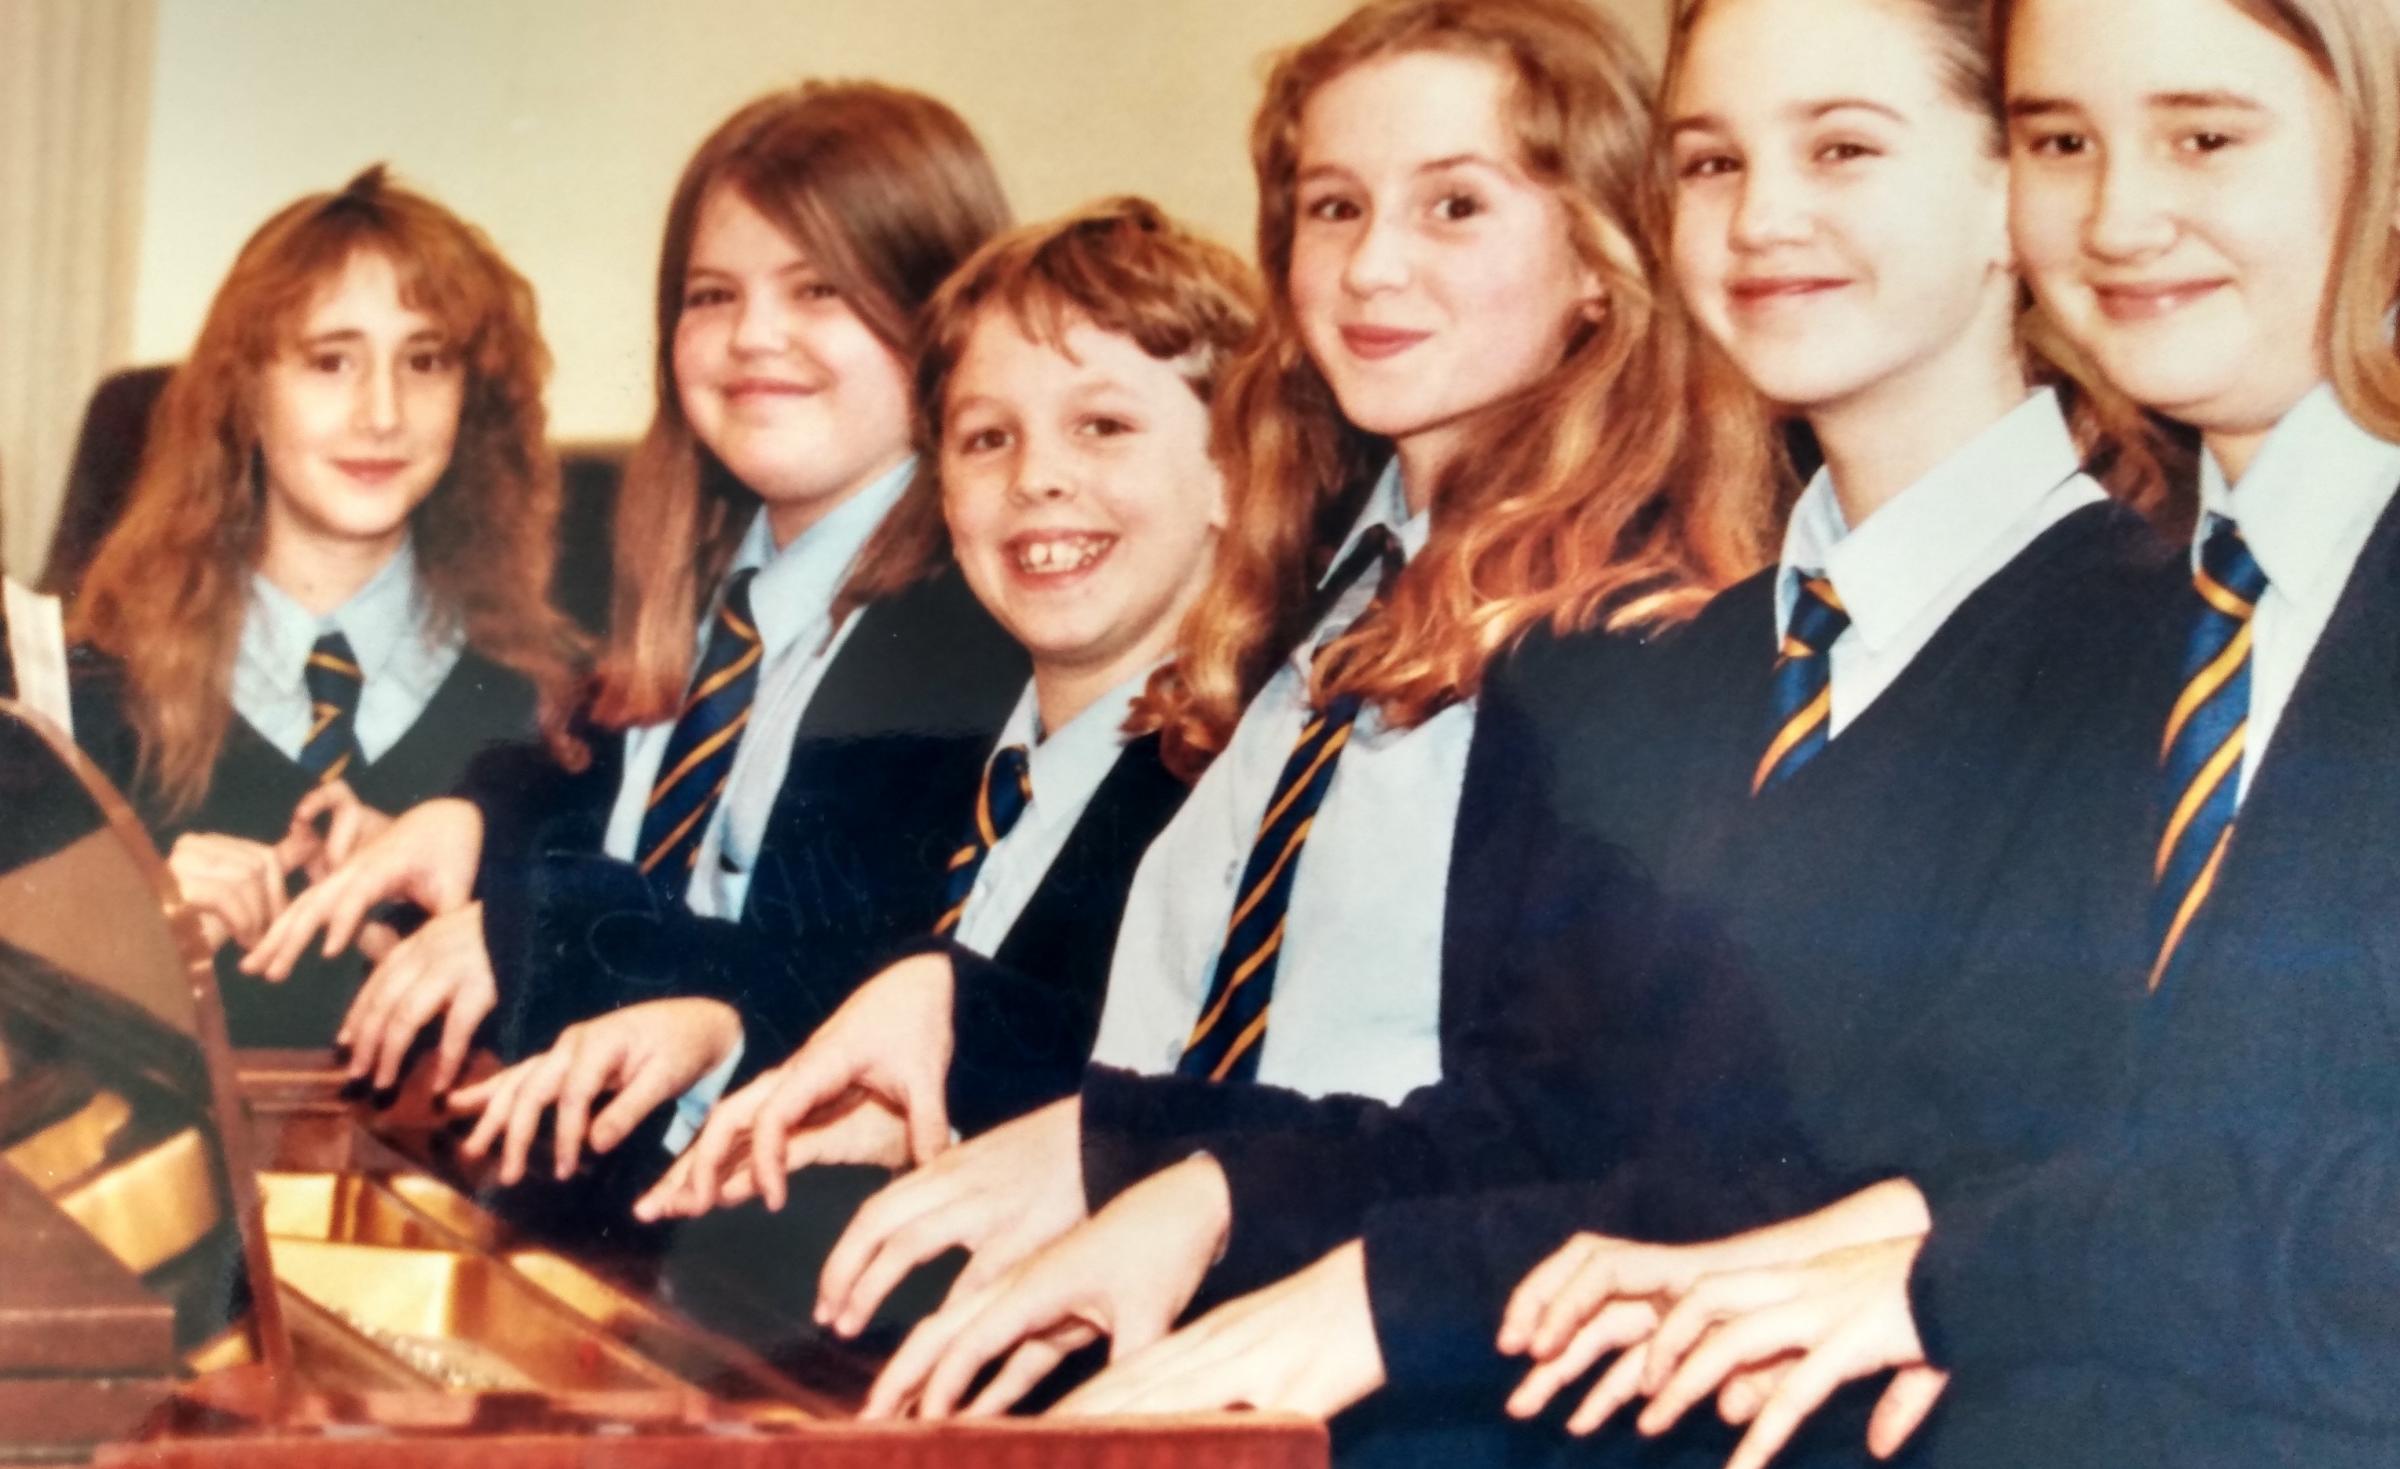 December 1995 and six pairs of hands are ready to hit the ivories